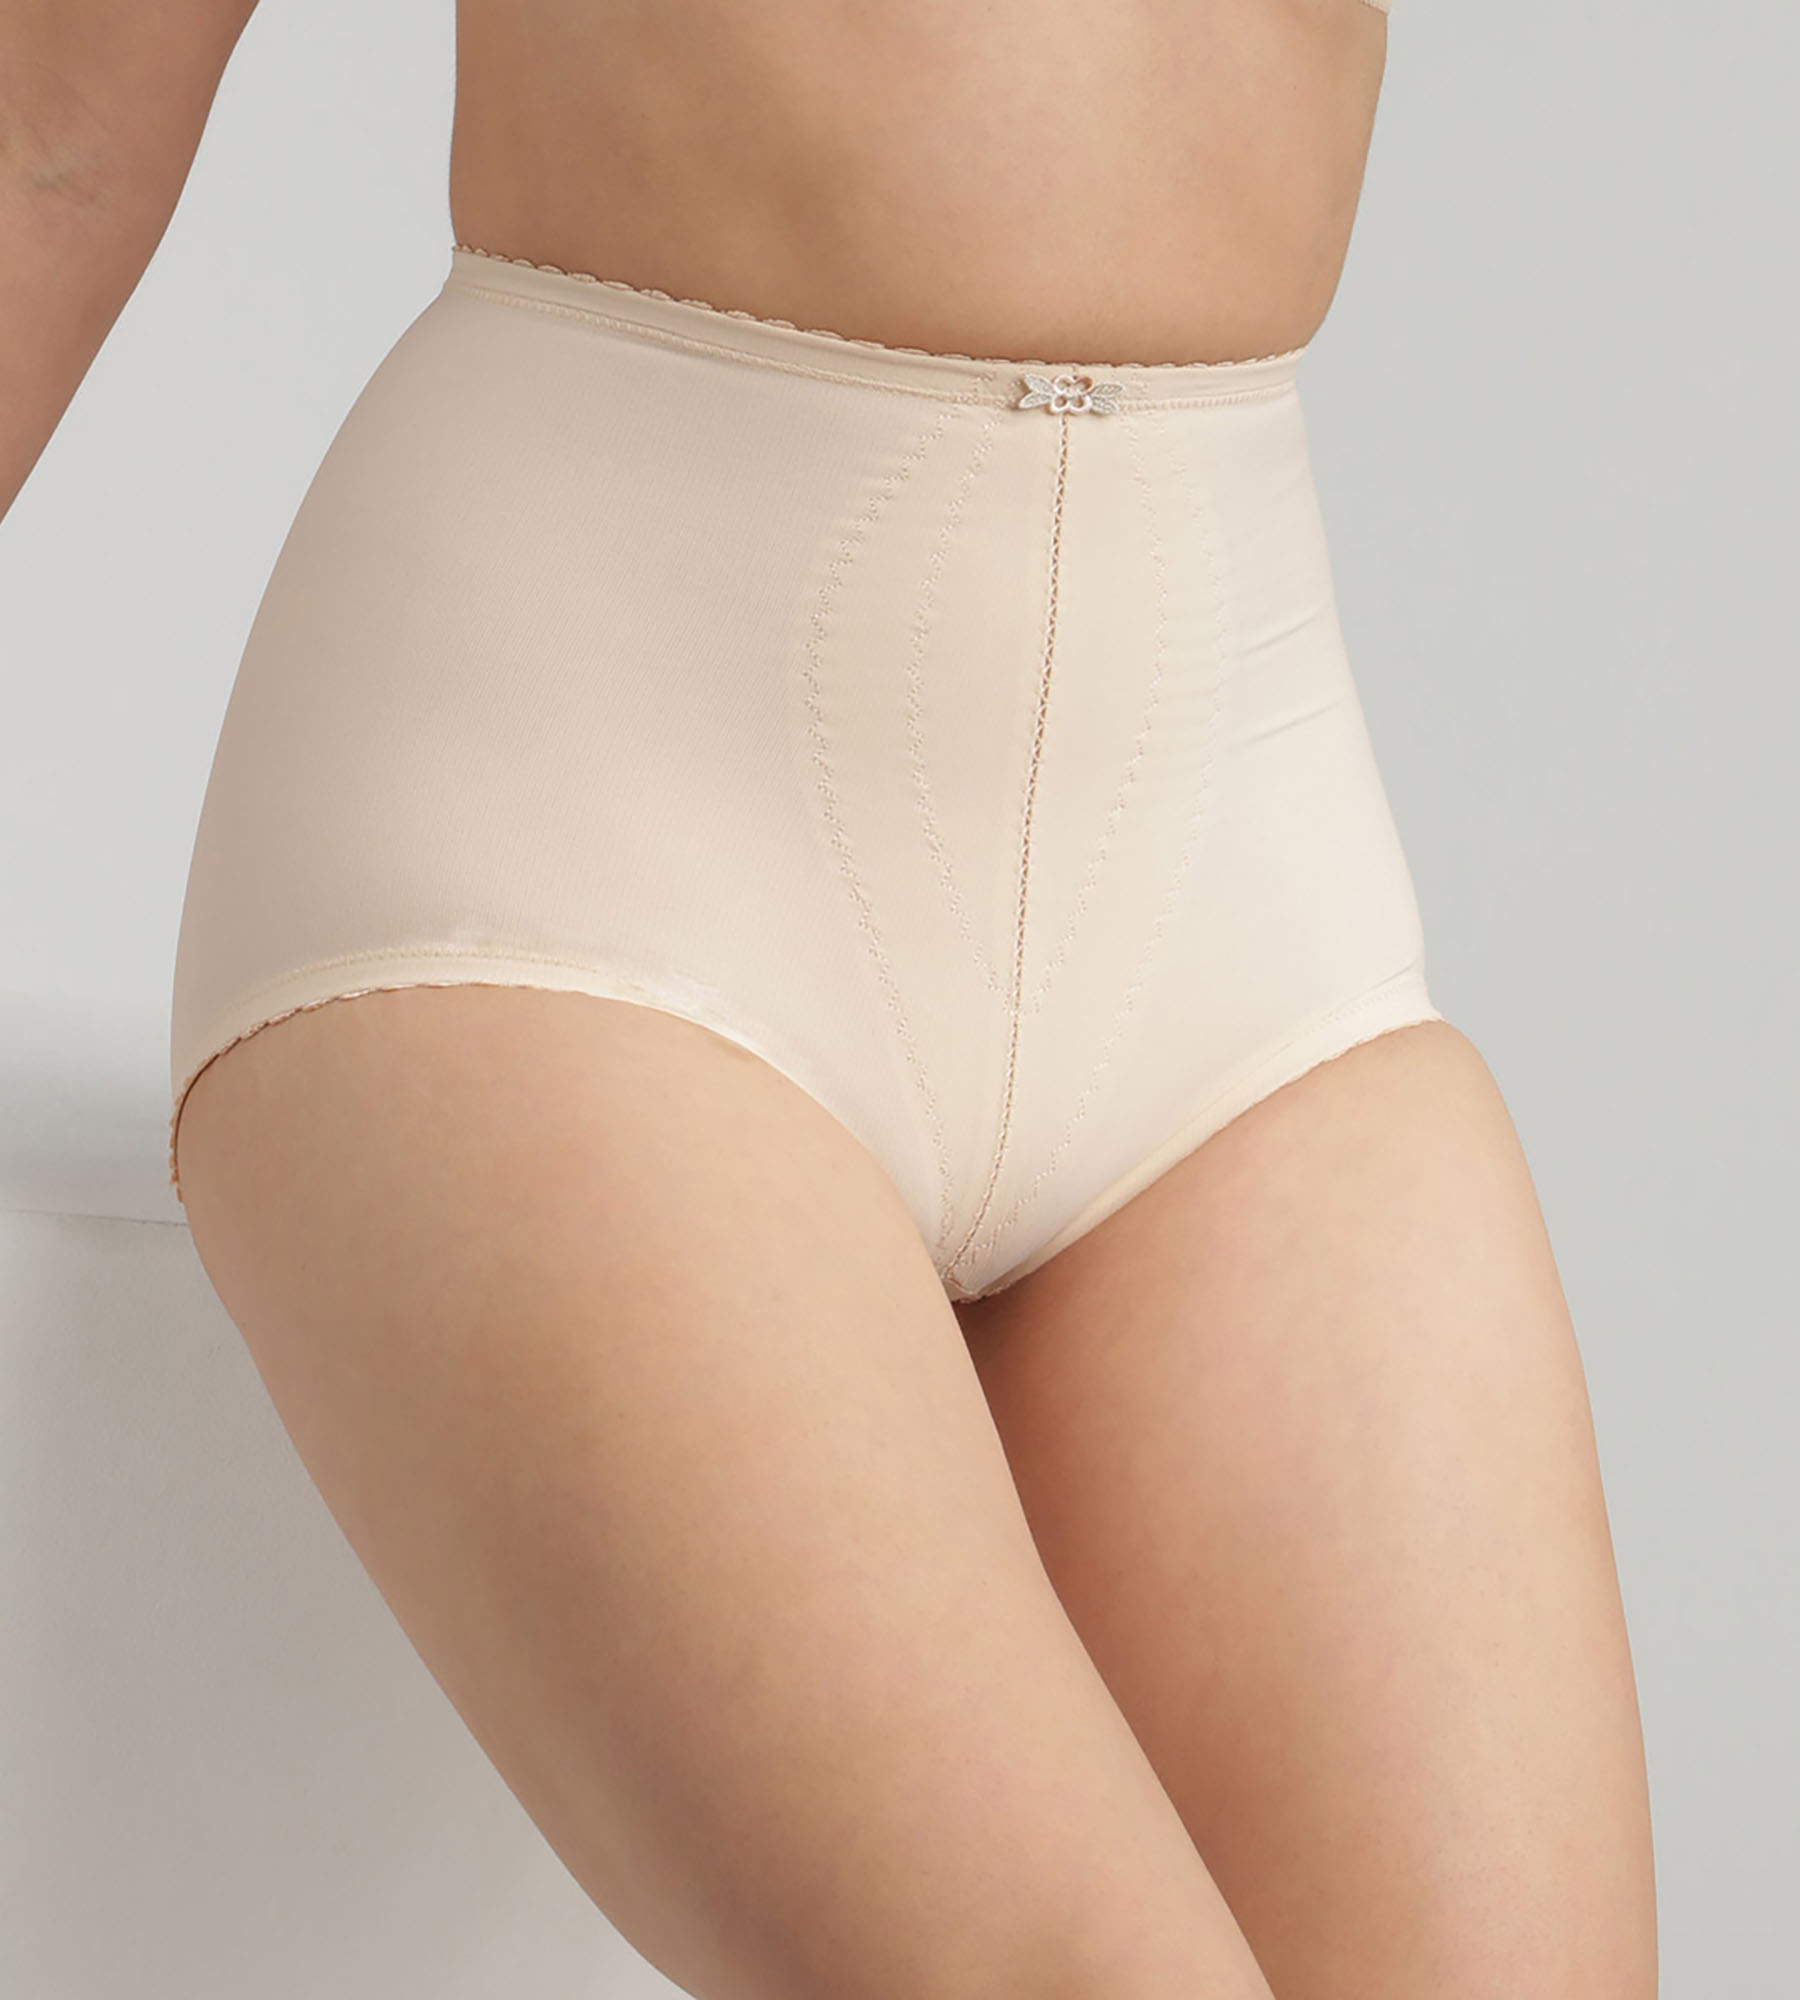 Vin Playtex I Can't Believe It's A Girdle Firm Control Panty Girdle Brief  White 5X Large 3940 